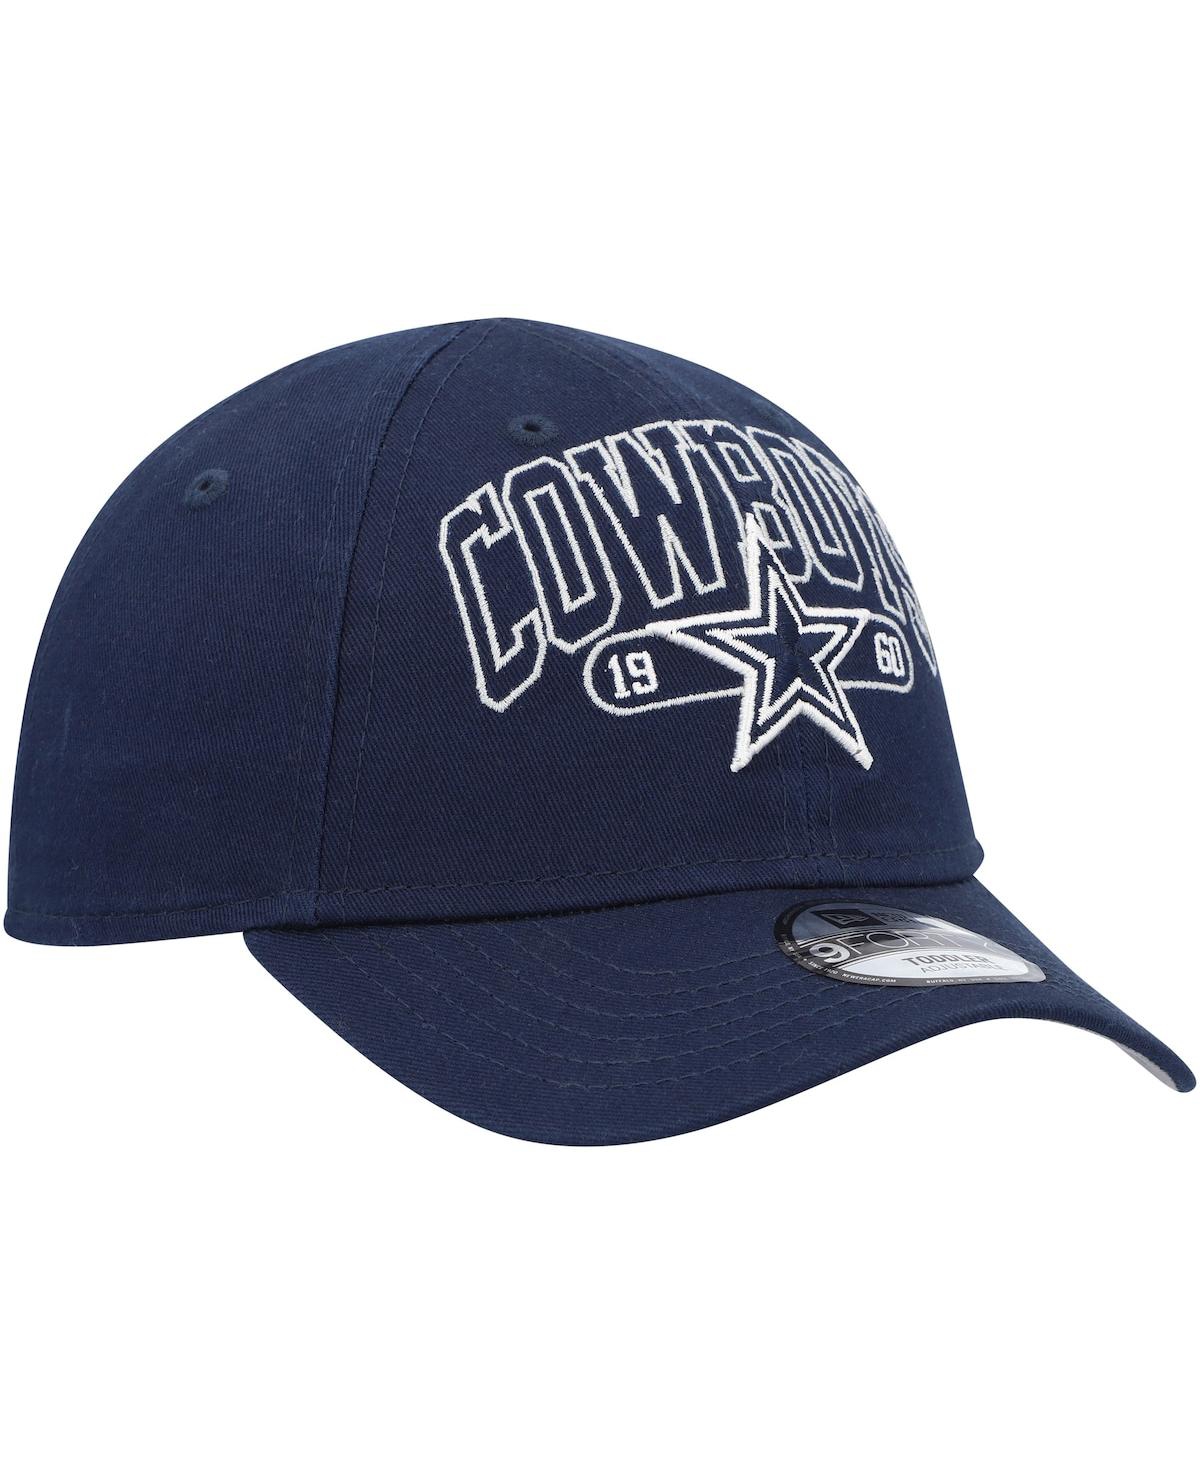 Shop New Era Toddler Boys And Girls  Navy Dallas Cowboys Outline 9forty Adjustable Hat